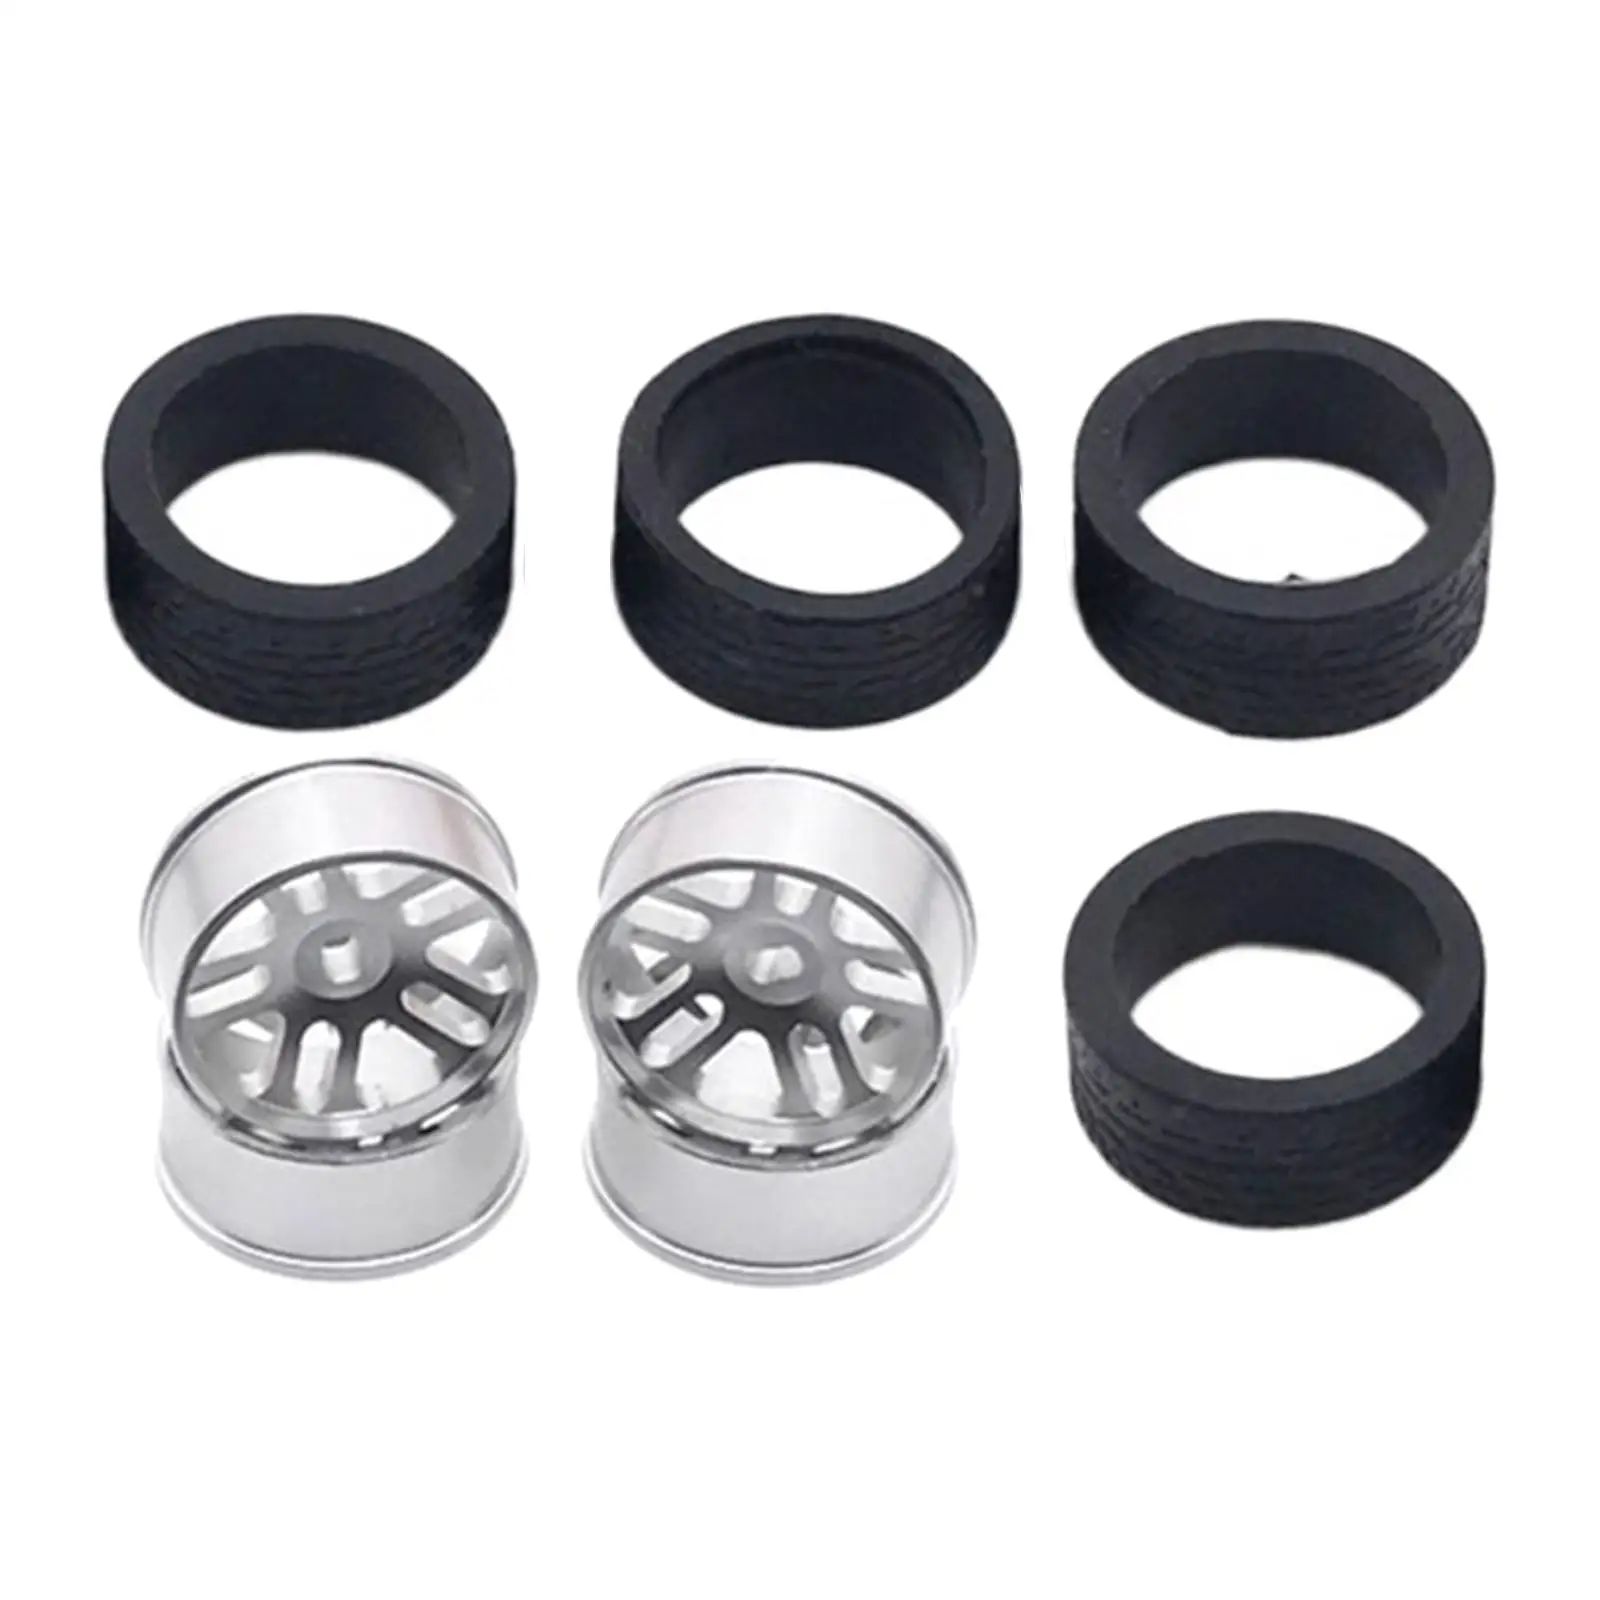 RC Car Tires Wheel Rims Upgrade Parts Spare Parts for Wltoys 284131 K999 RC